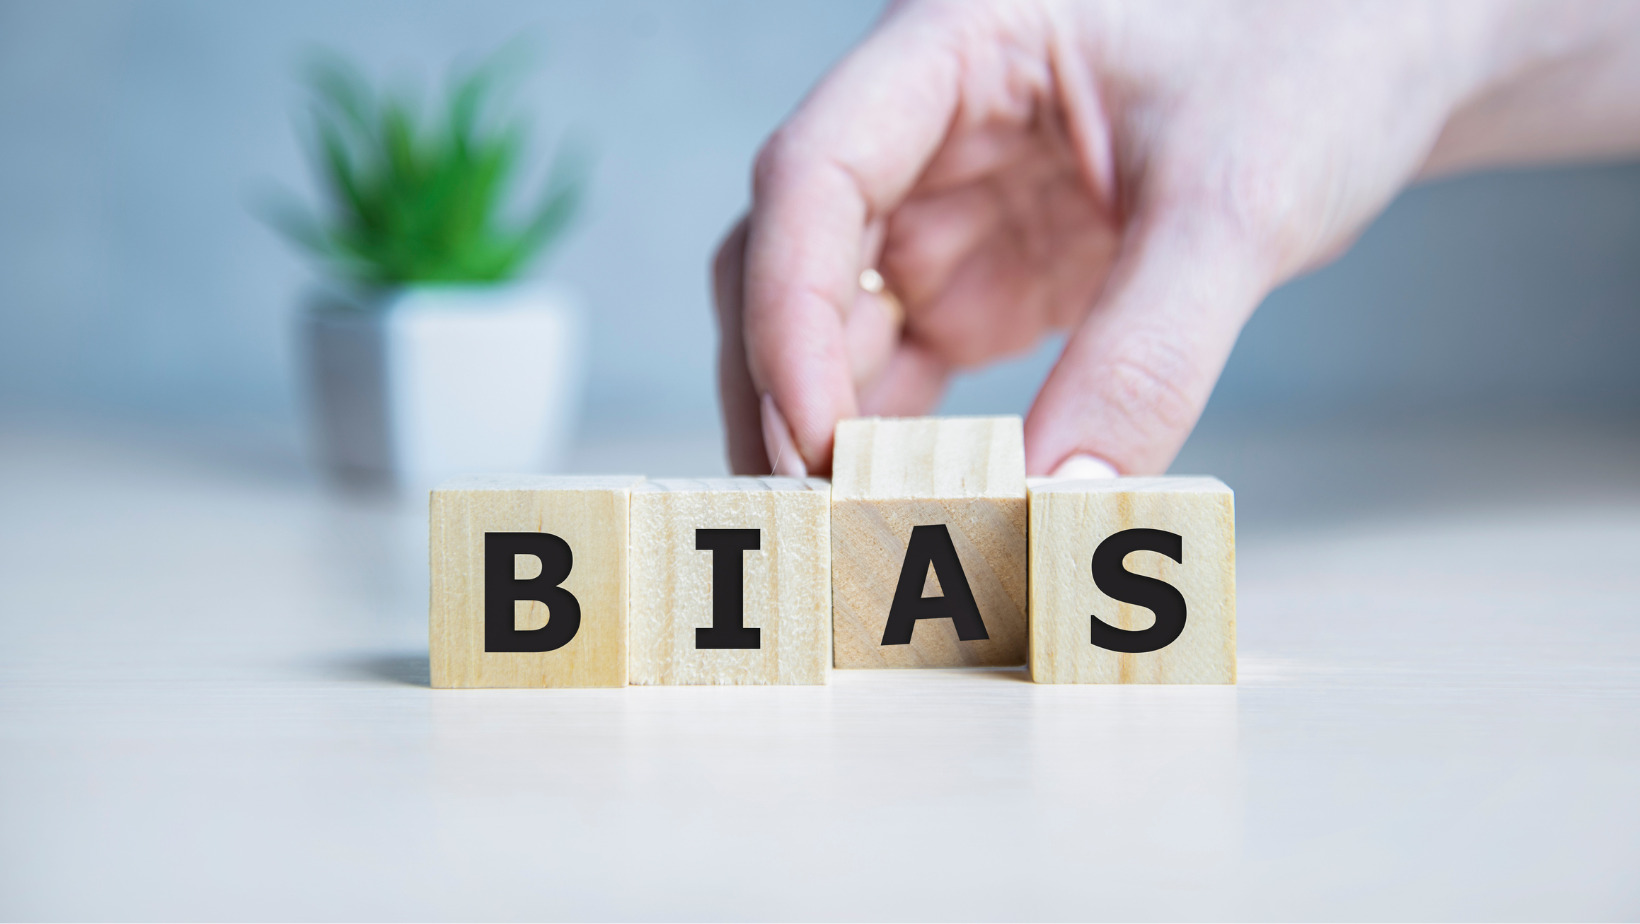 Mitigating Unconscious Bias in the Workplace